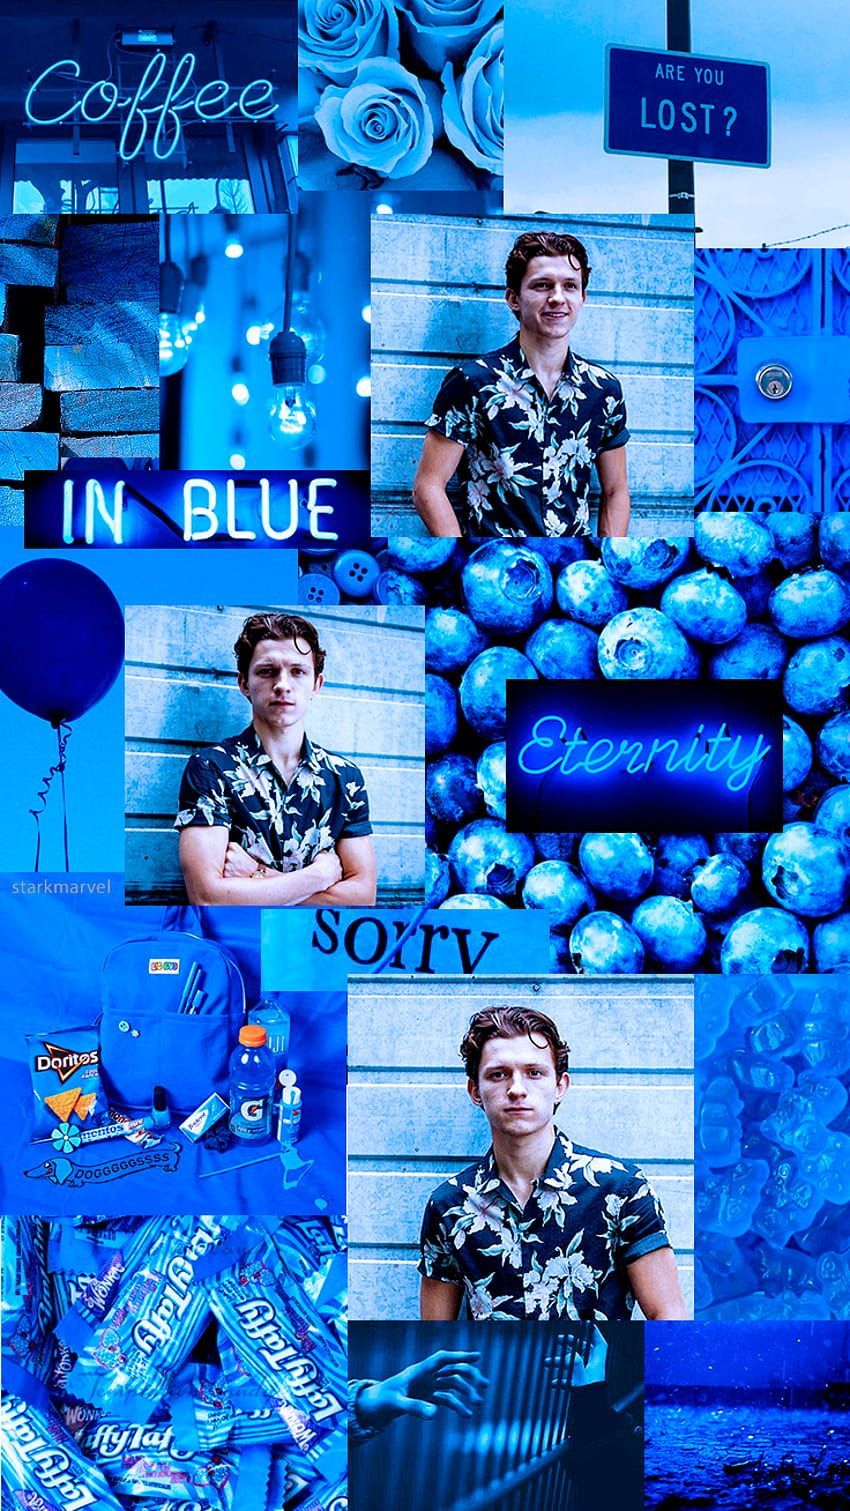 A collage of pictures with blue backgrounds - Doritos